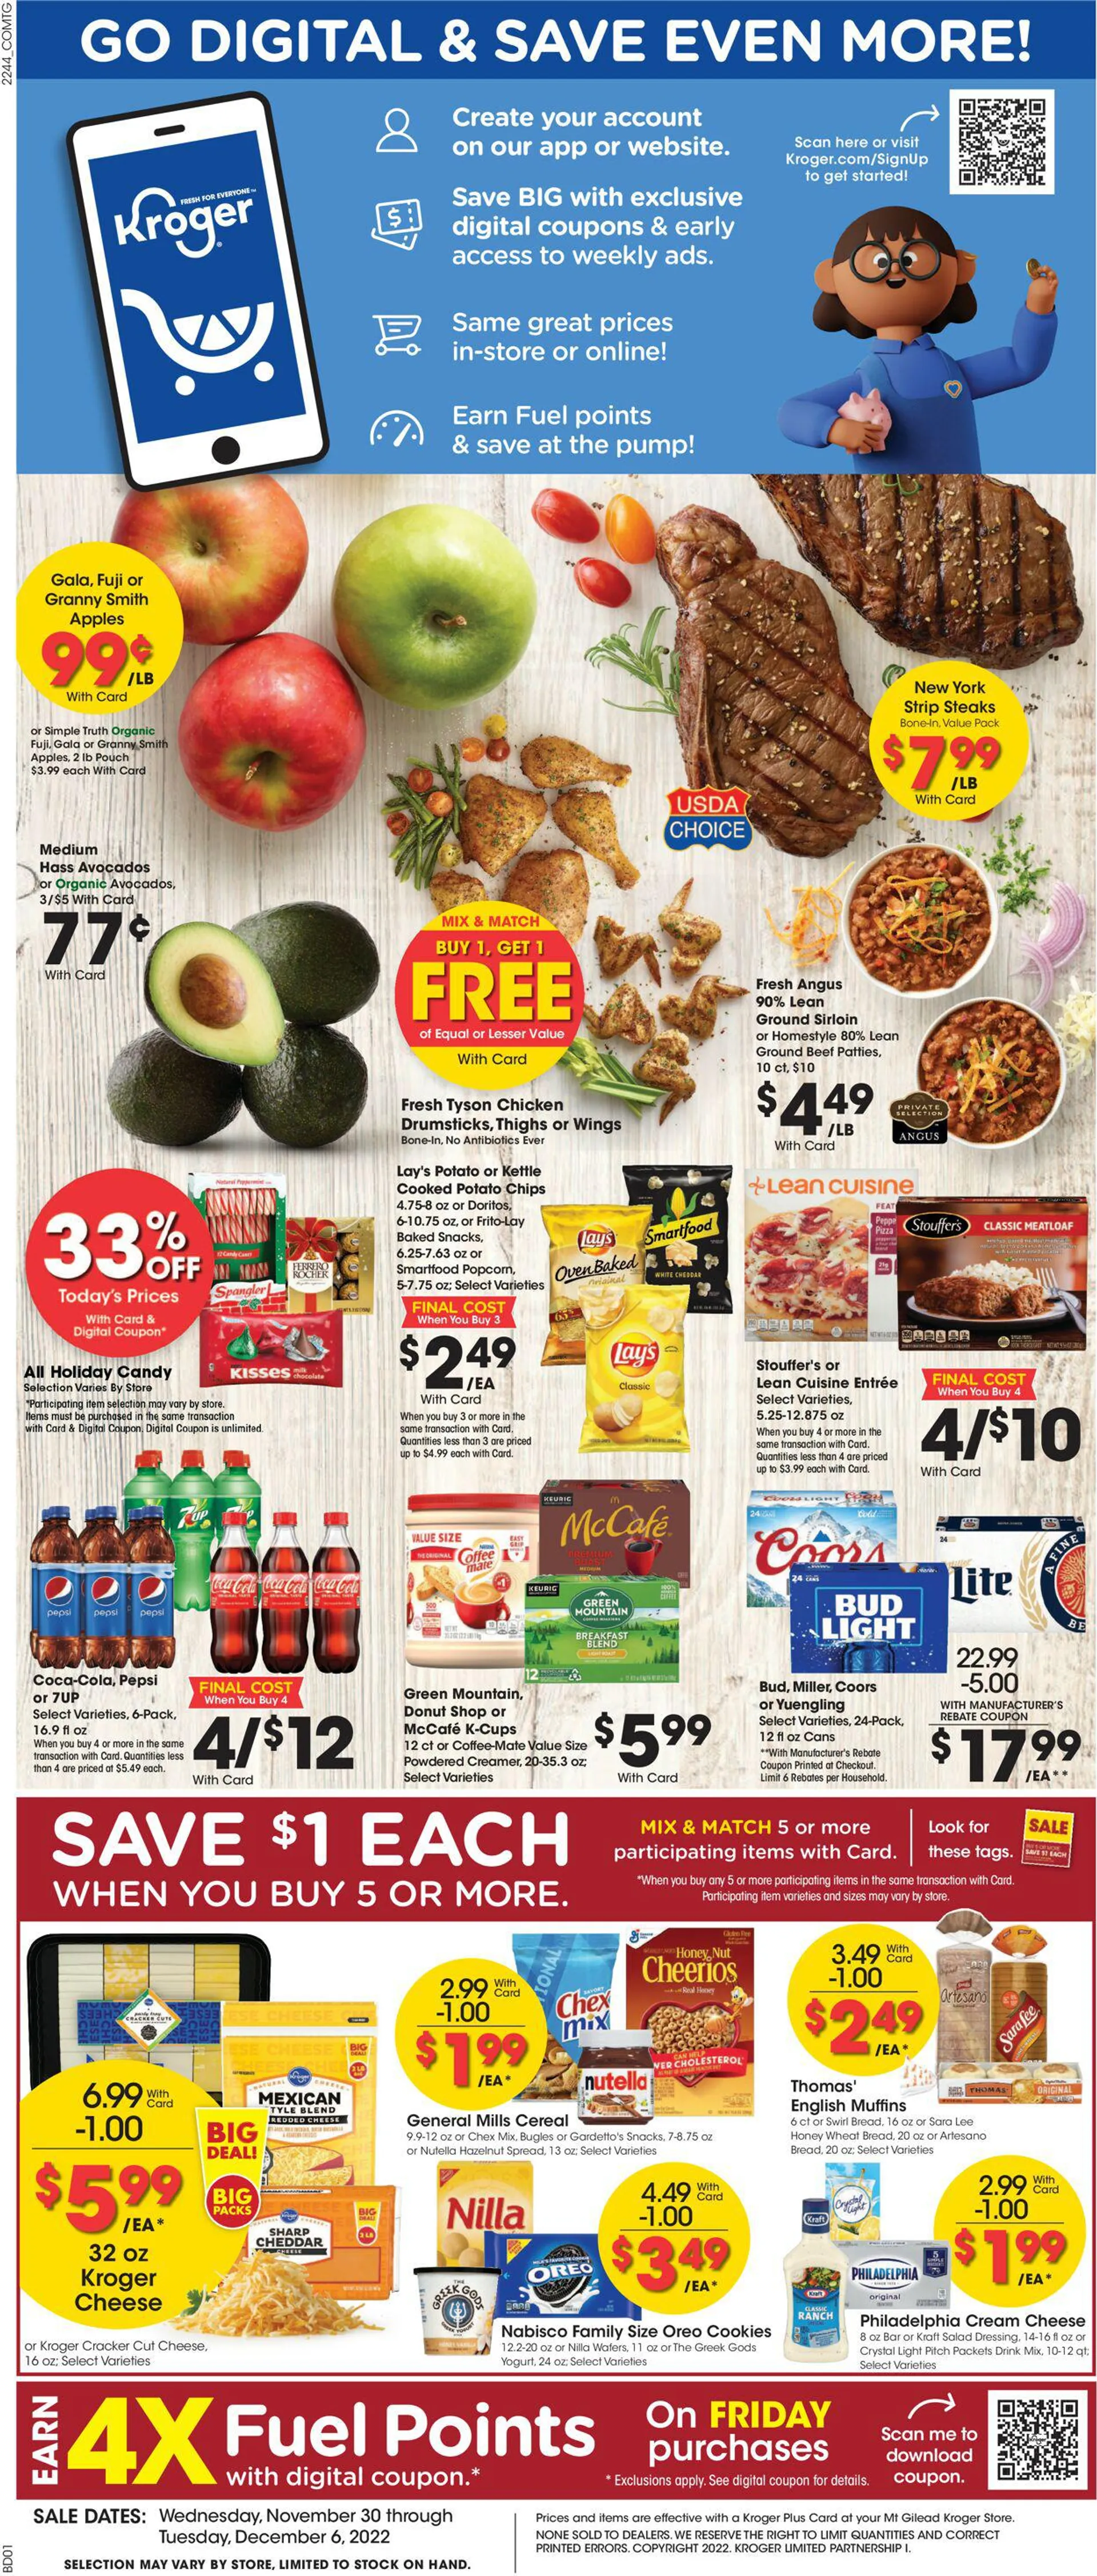 Kroger Current weekly ad - 1